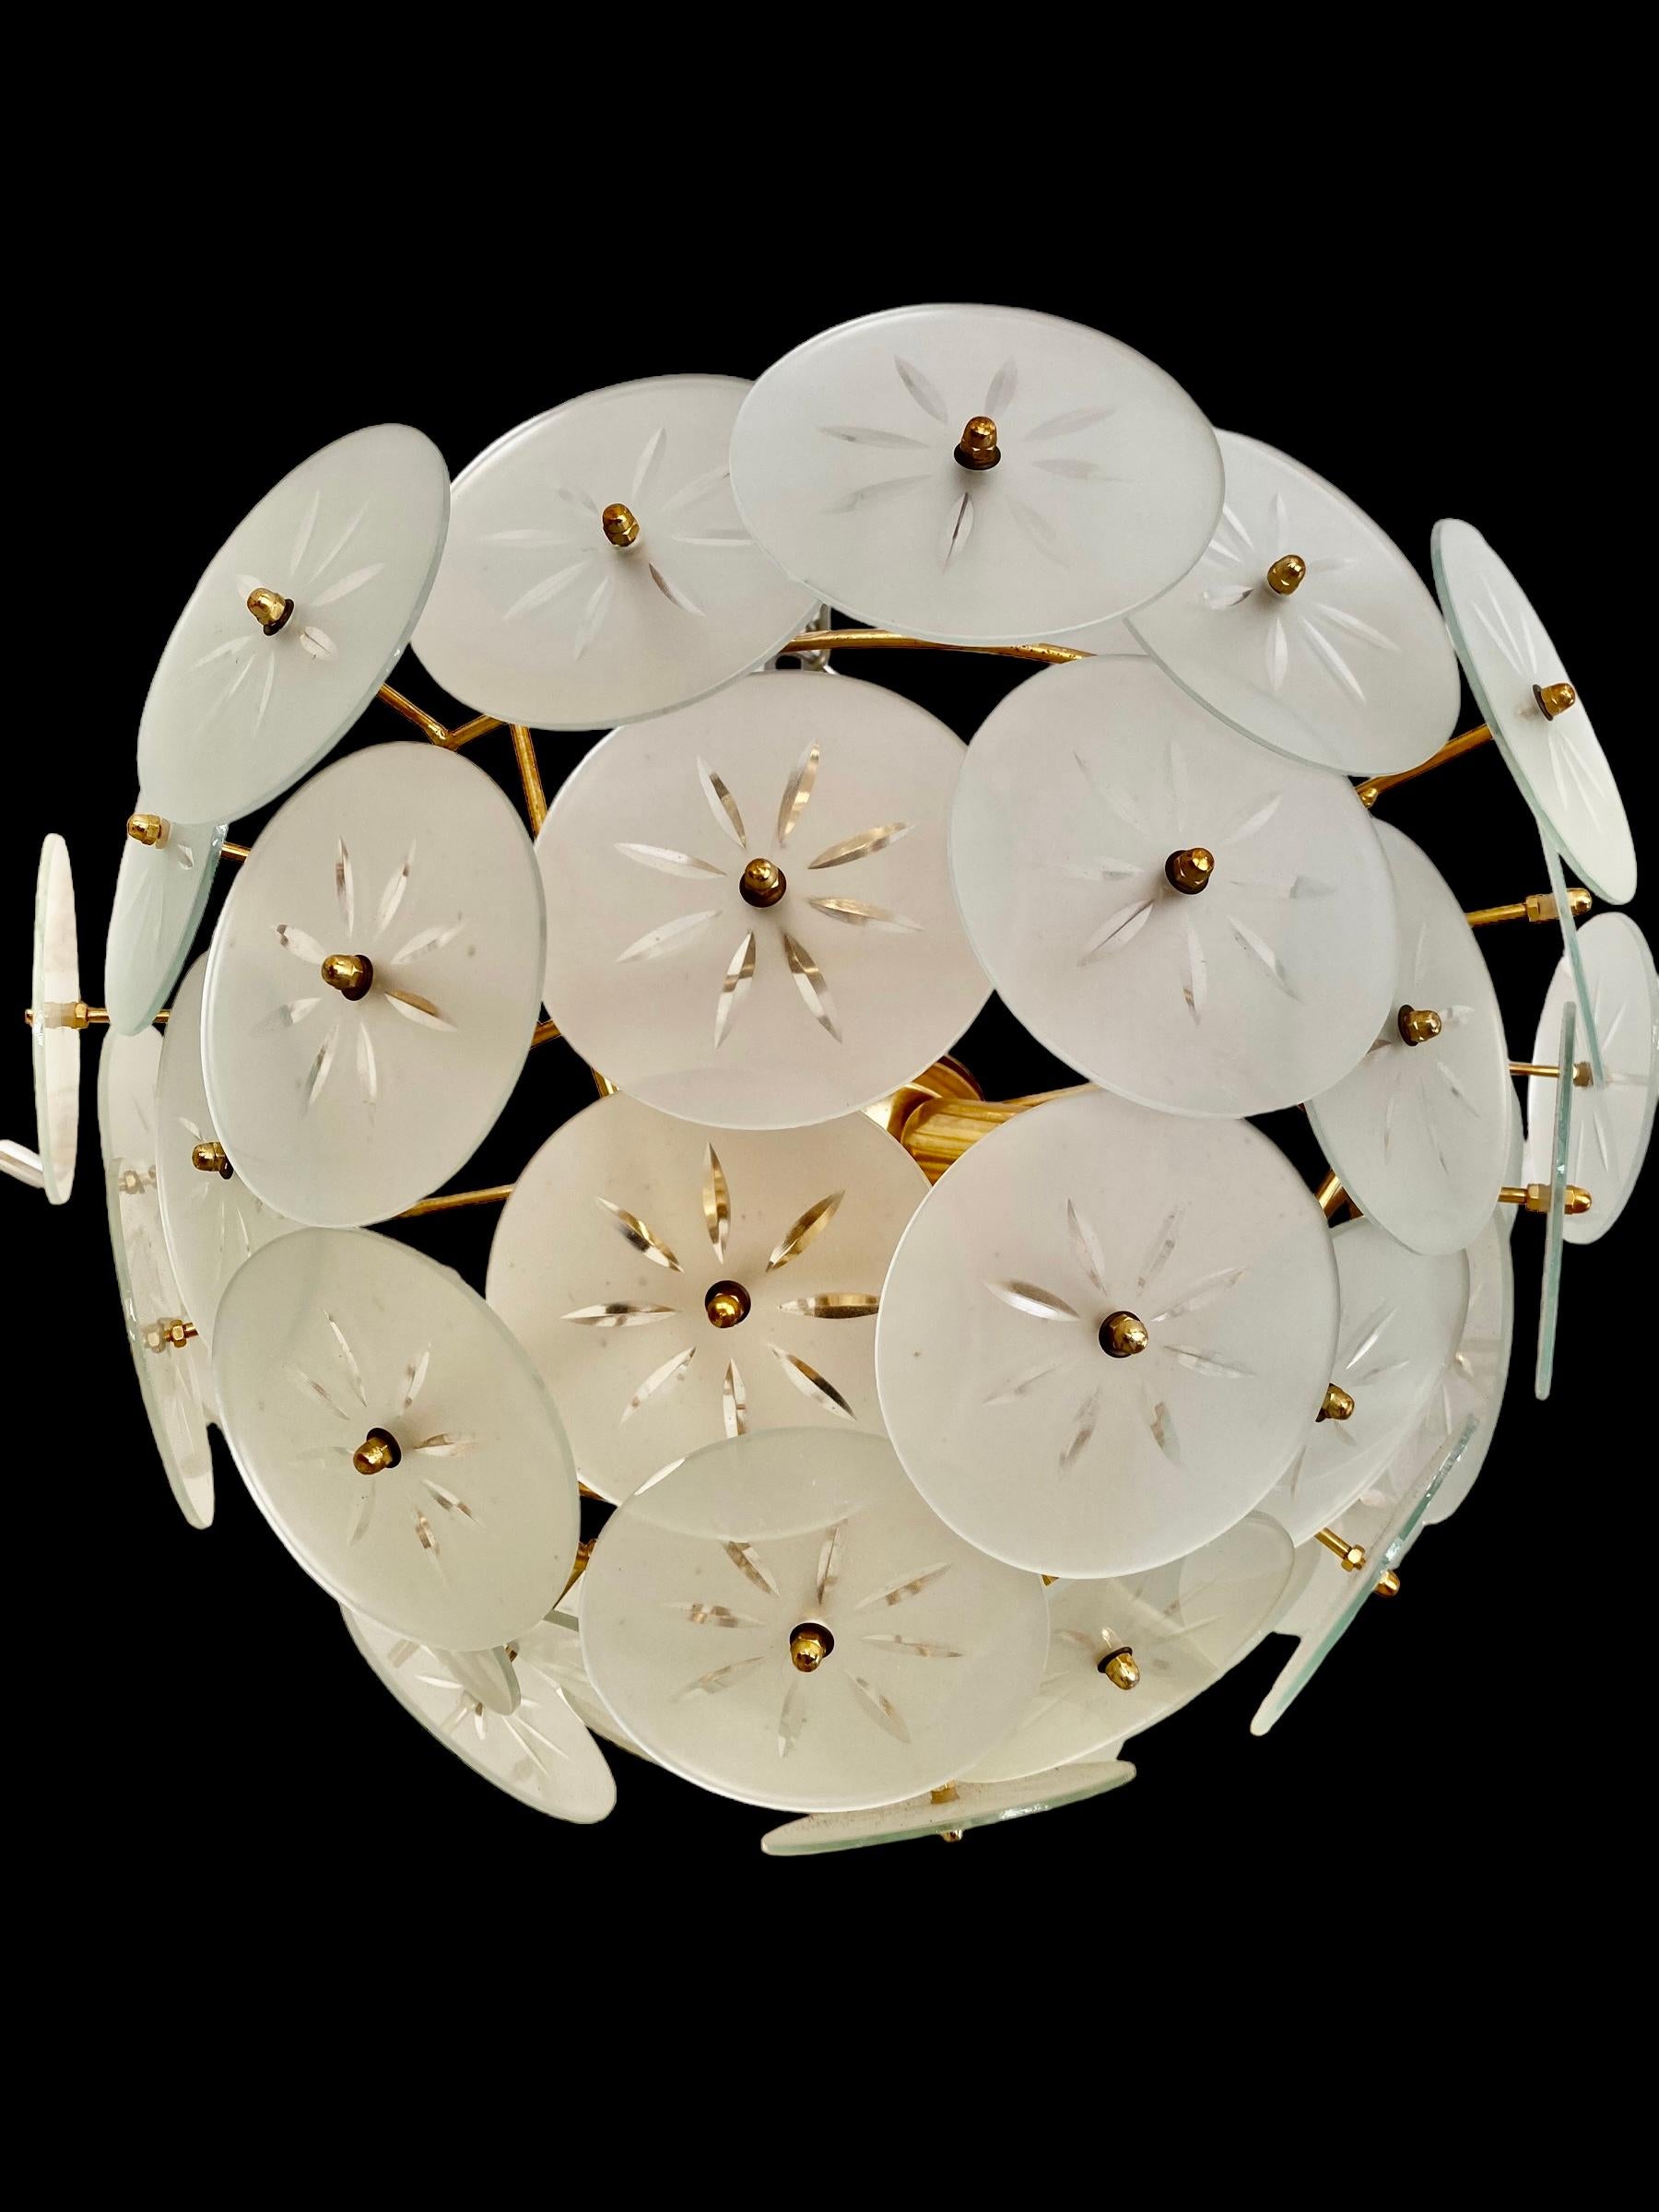 VECA sconce glass with flower glass. The design and the quality of the glass make this piece the best in design.
This Sconce are in good condition.
VECA is an Italian company known for its high quality handcrafted lighting. The company, which has